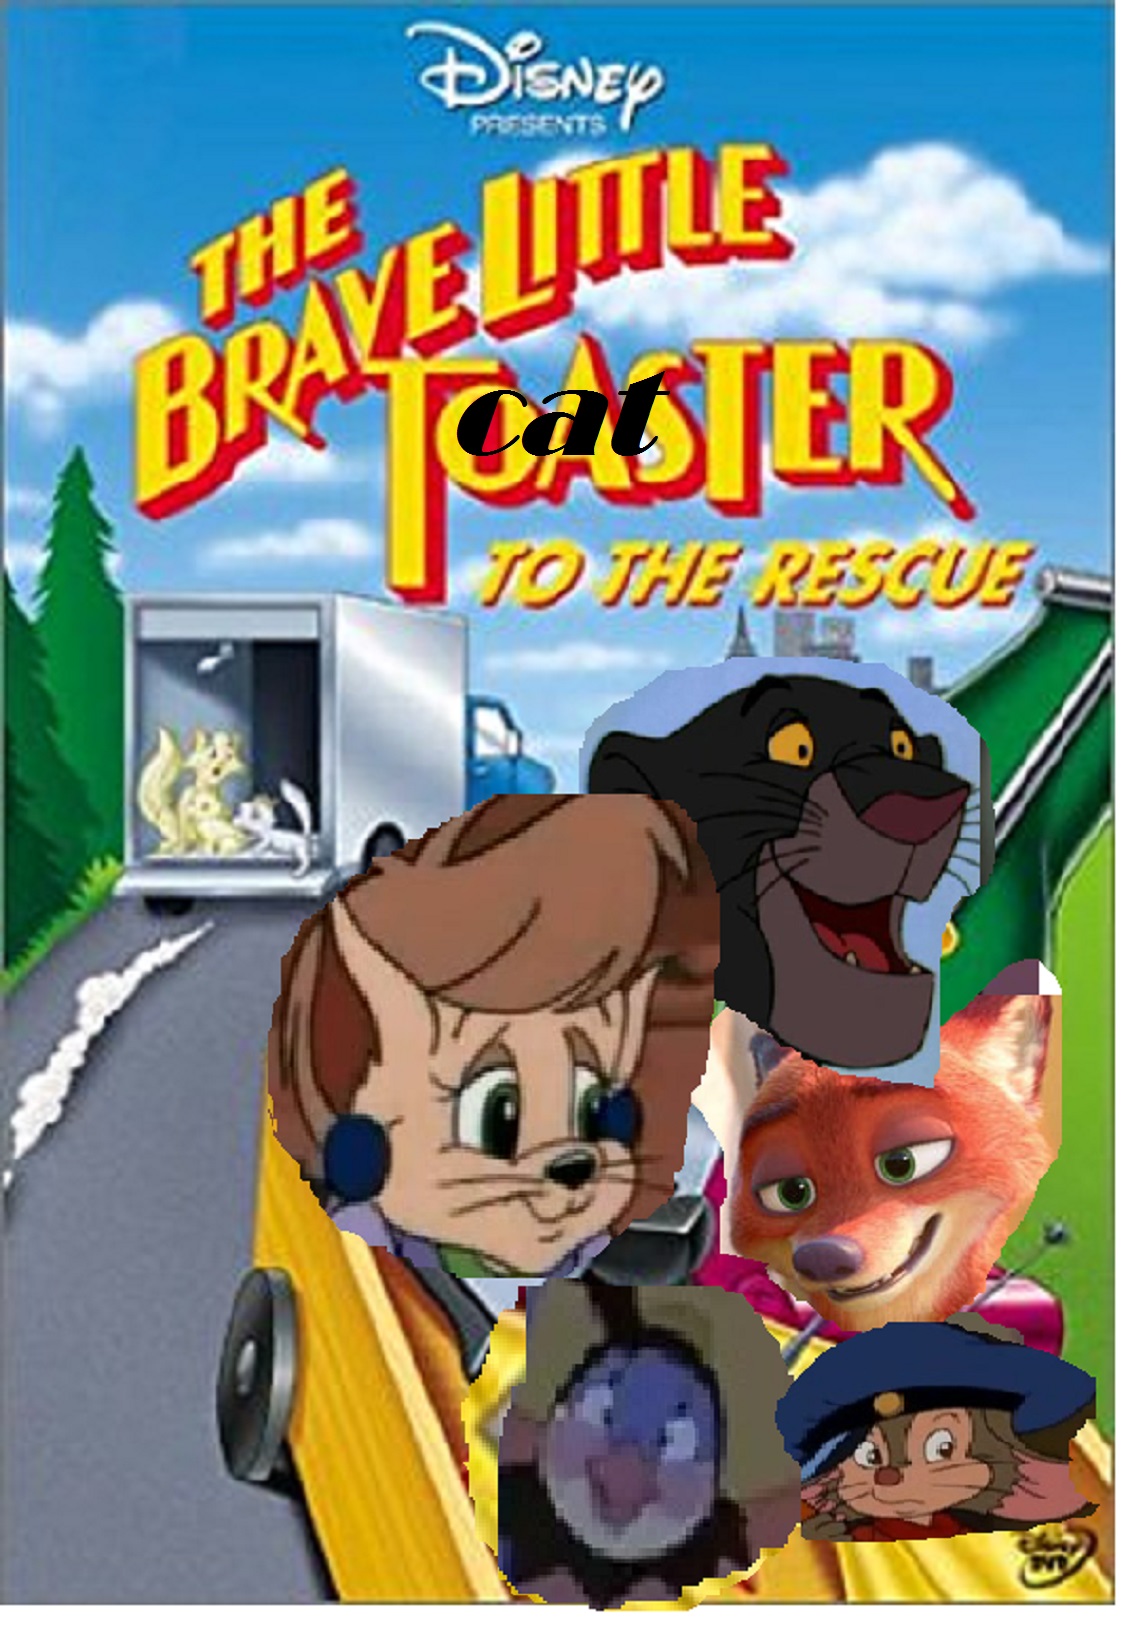 The Brave Little Toaster to the Rescue Posters				Fan Feed